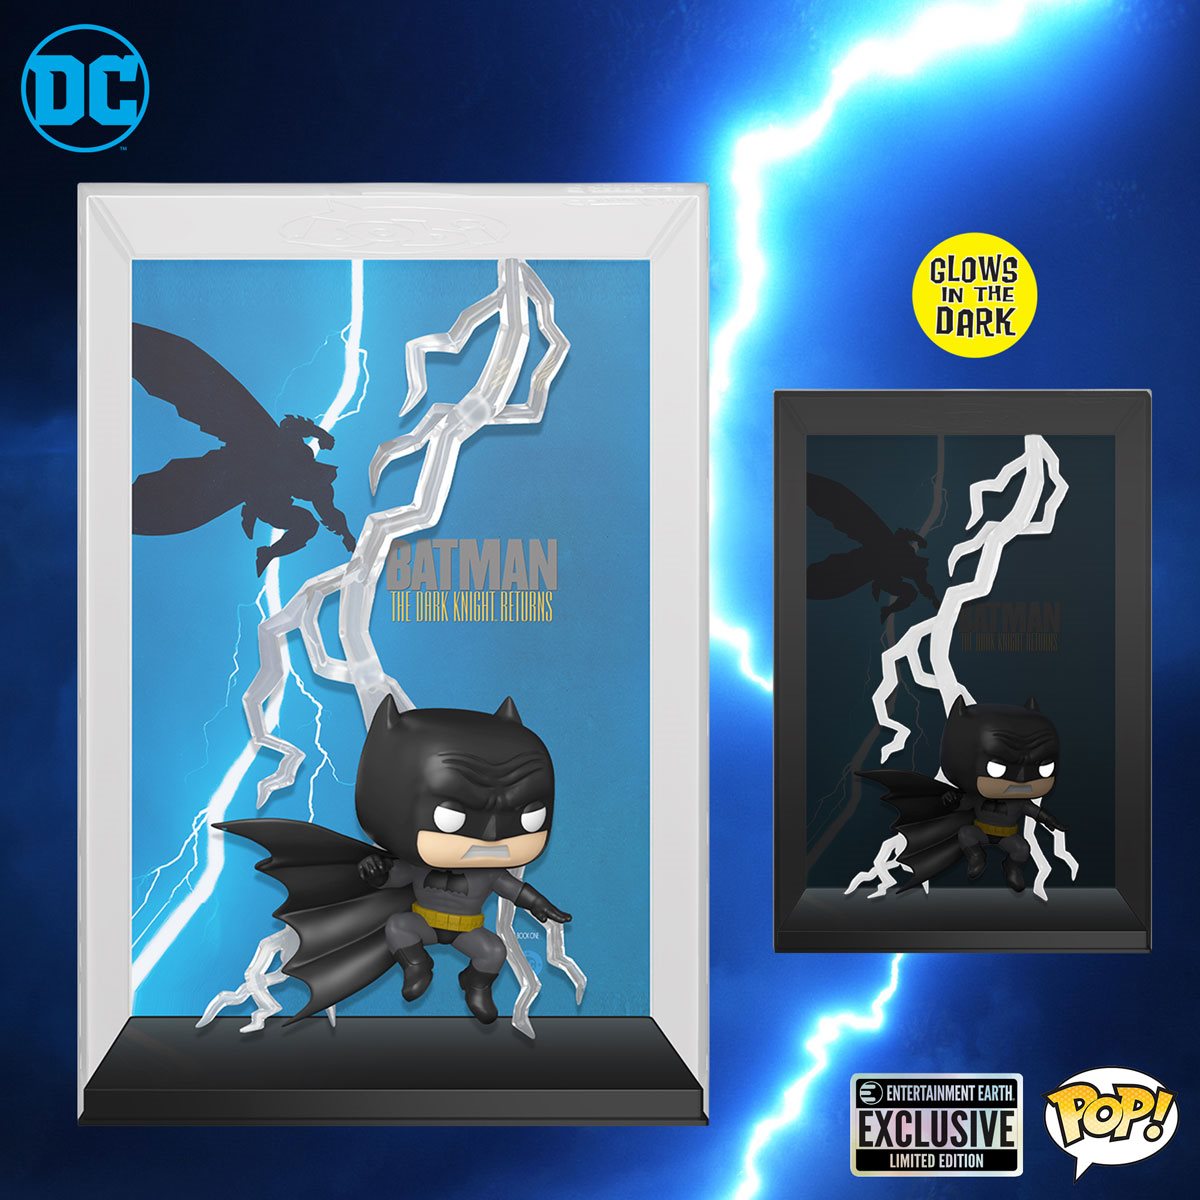 Entertainment Earth exclusive Batman: The Dark Knight Returns Pop! Comic Cover now available to preorder! #Funko #Batman #ad 

⚡️ee.toys/SKTVK4

#DarkKnight #TheDarkKnightReturns #Pop #PopVinyl #EntertainmentEarth #Toys #Collectibles #Comics #DCComics #Funkopophunters